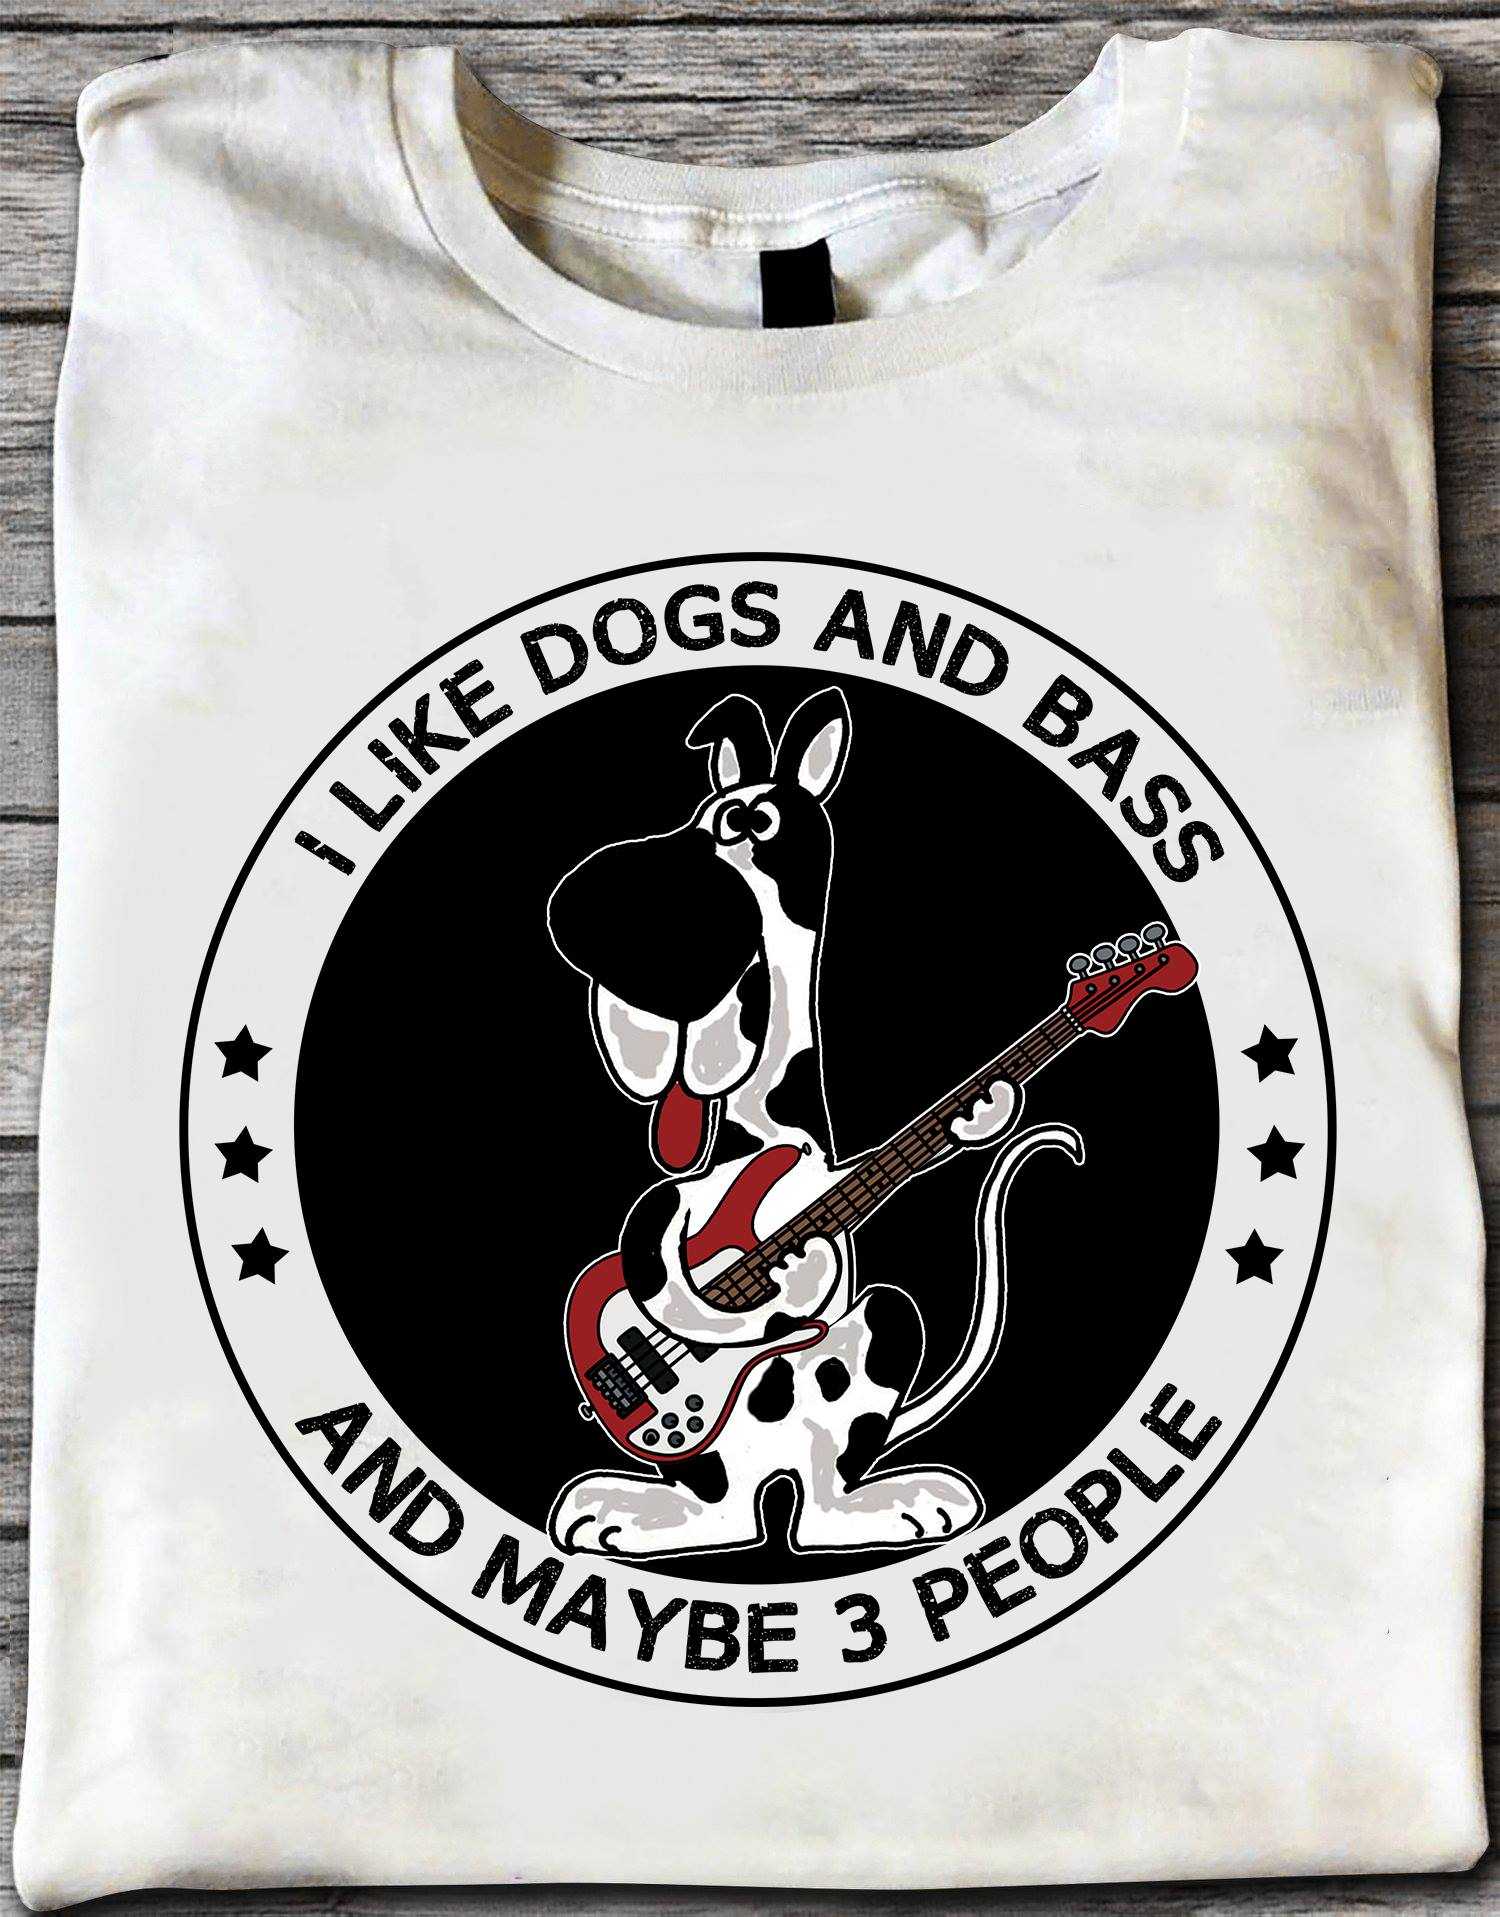 I like dogs and bass and maybe 3 people - Dog bass guitarist